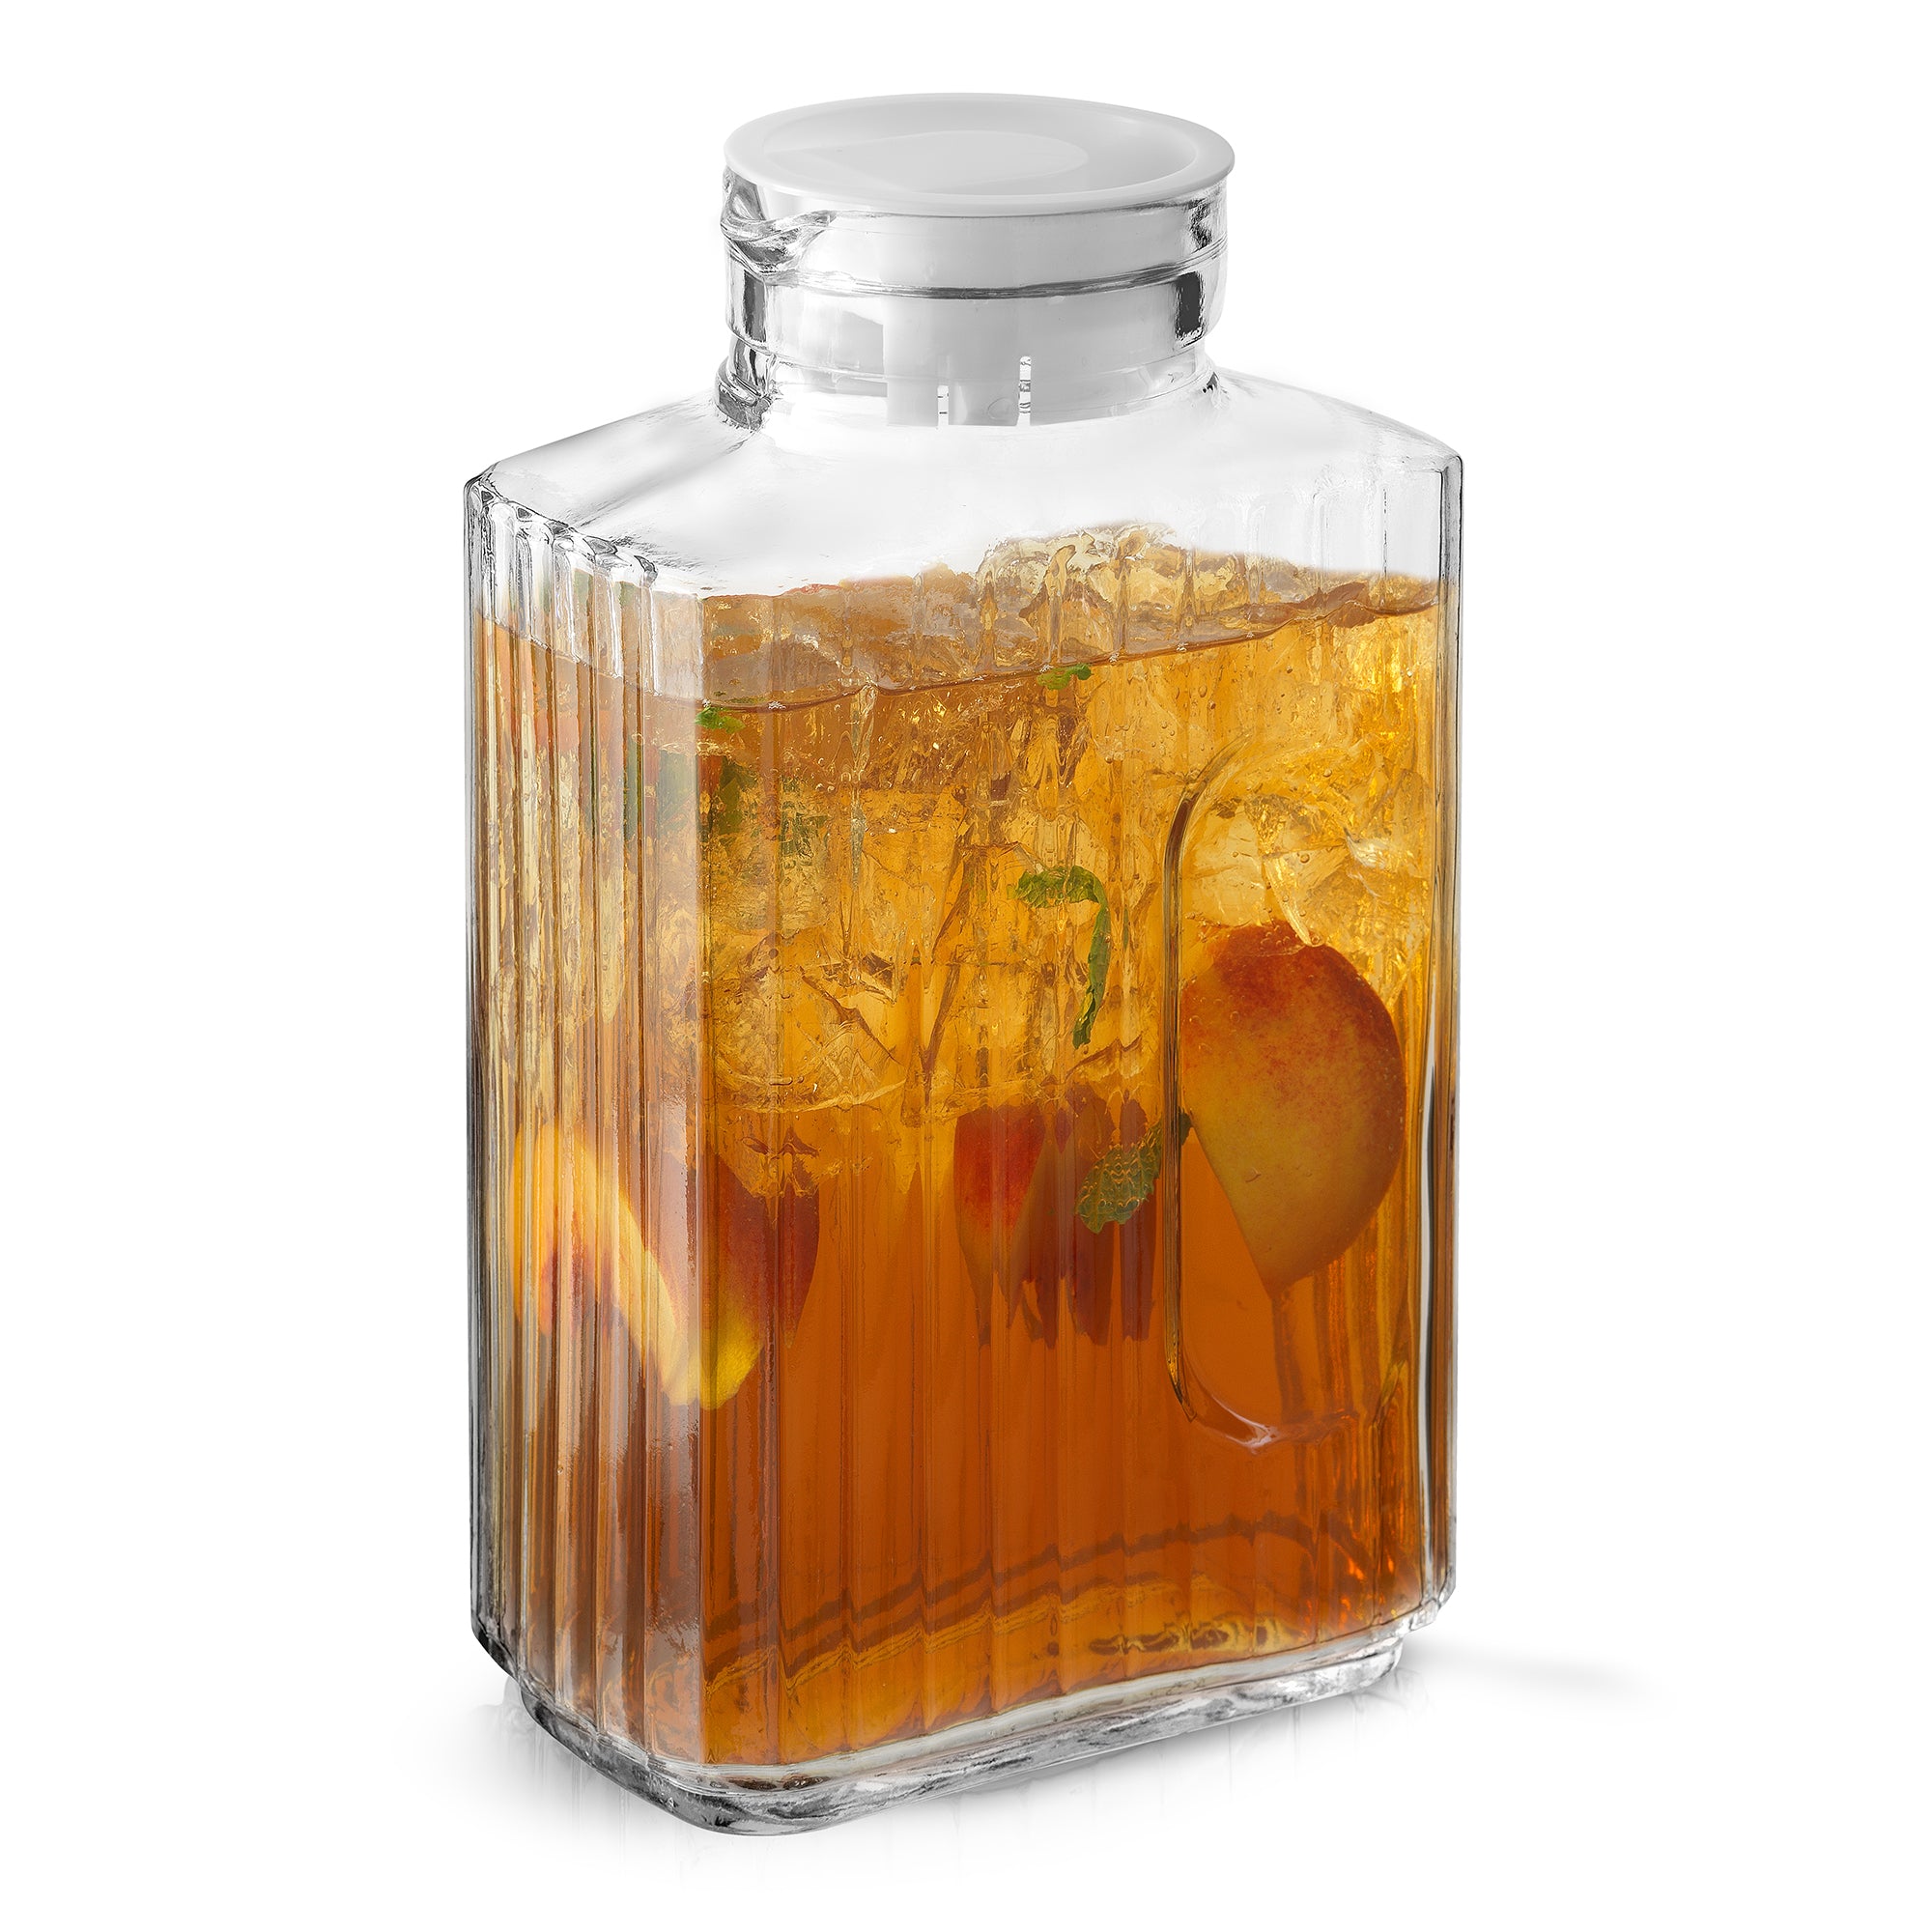 A glass pitcher filled with iced tea and fruit slices sits on a plain white background. The pitcher is clear spout for pouring. This is a JoyJolt Beverage Serveware Glass Pitcher.